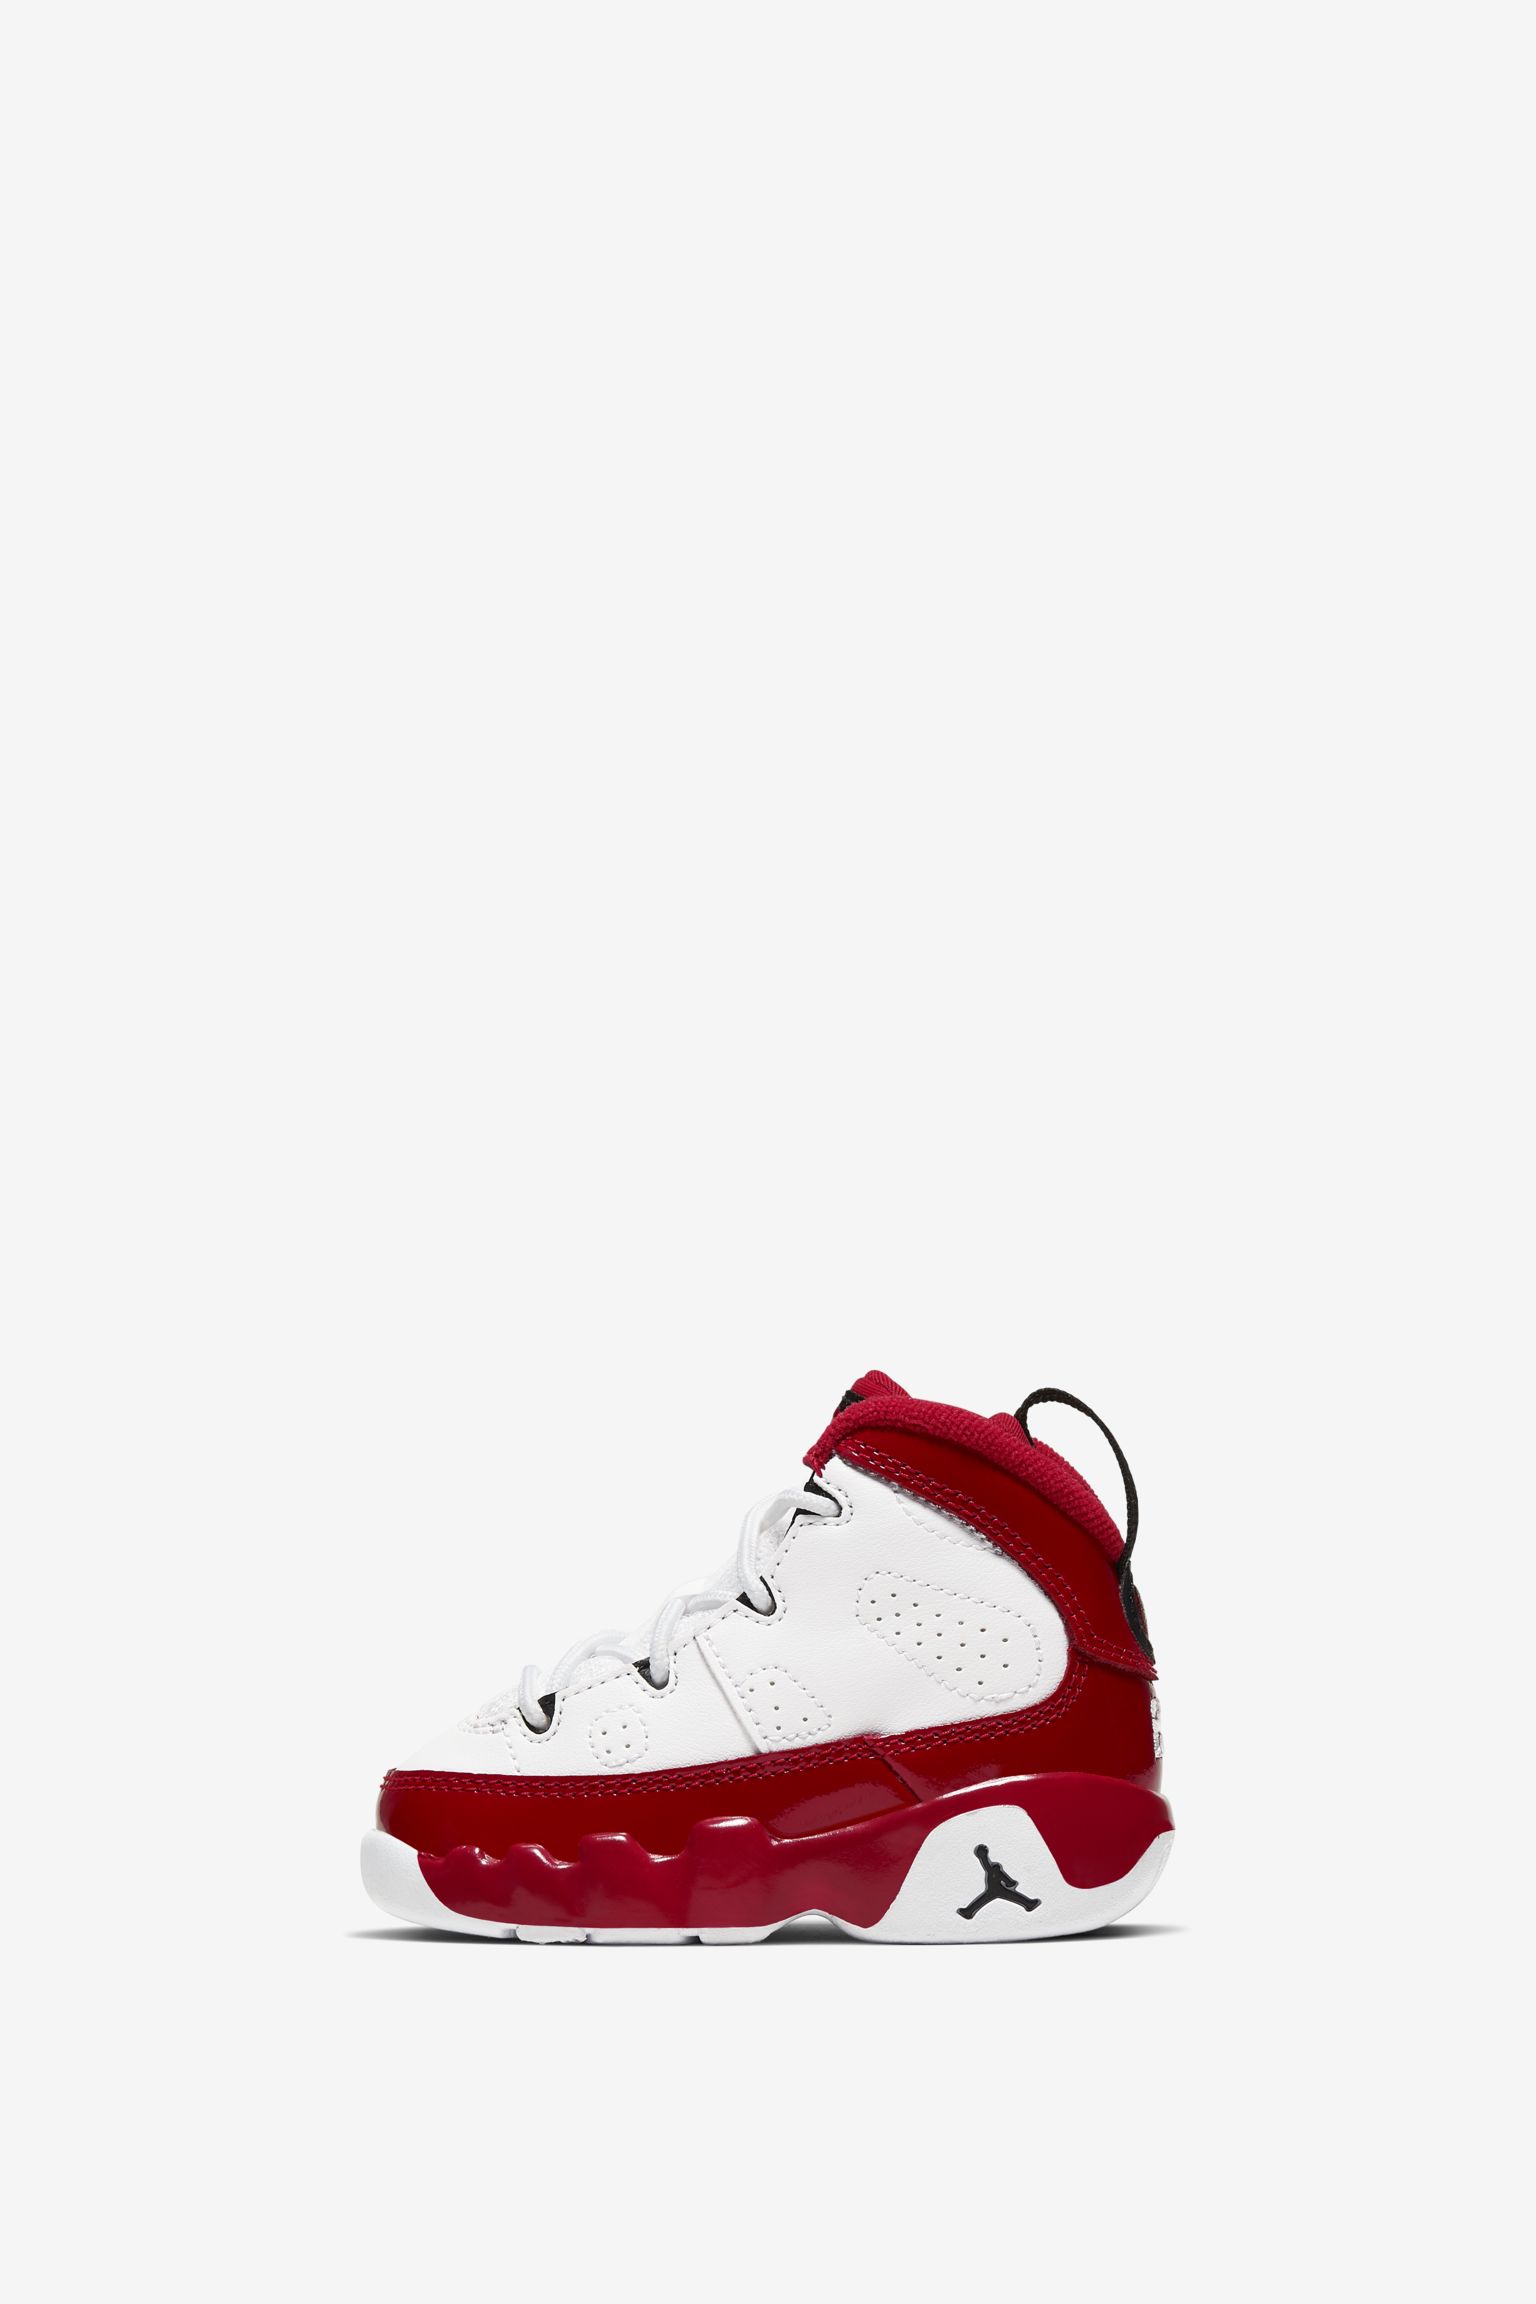 jordan red and white 9